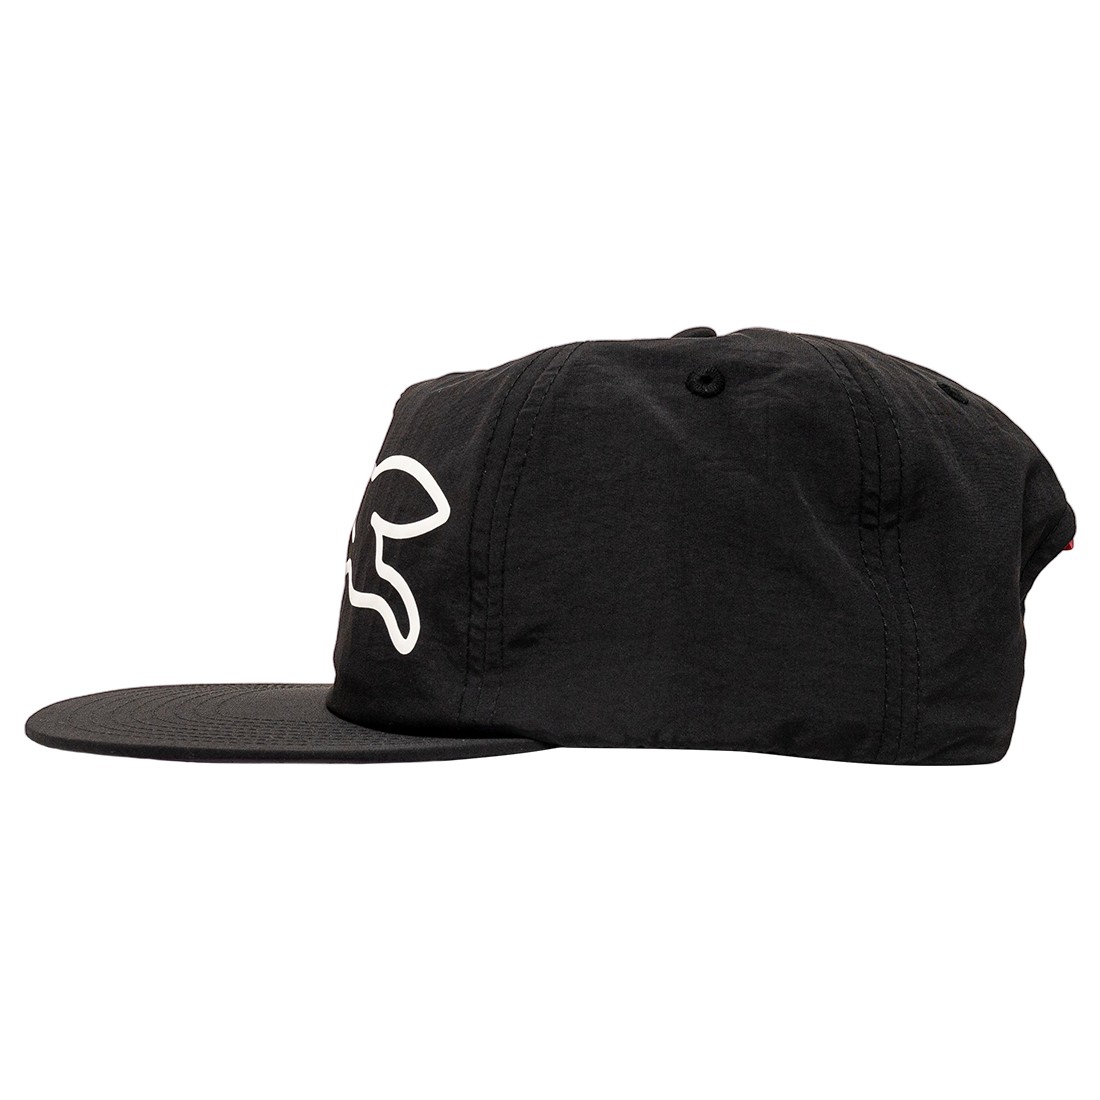 The Mitchell & Ness Cropped Metallic Snapback Caps are